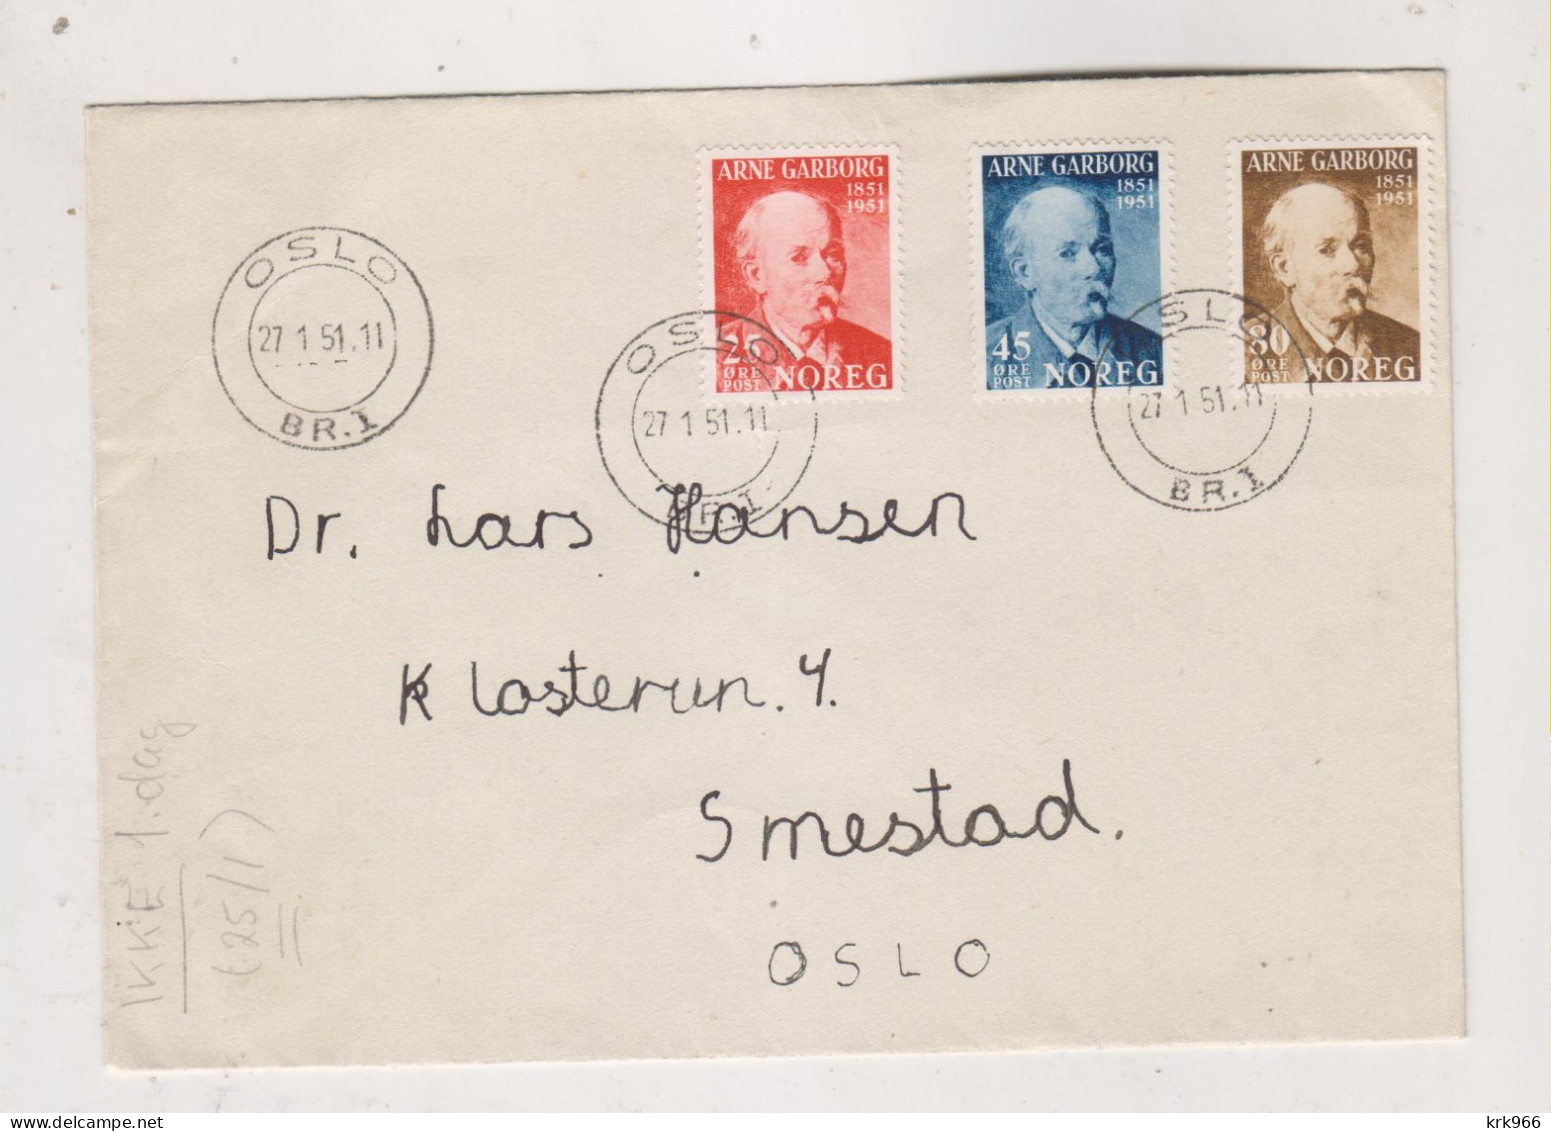 NORWAY 1951 OSLO Nice Cover - Covers & Documents